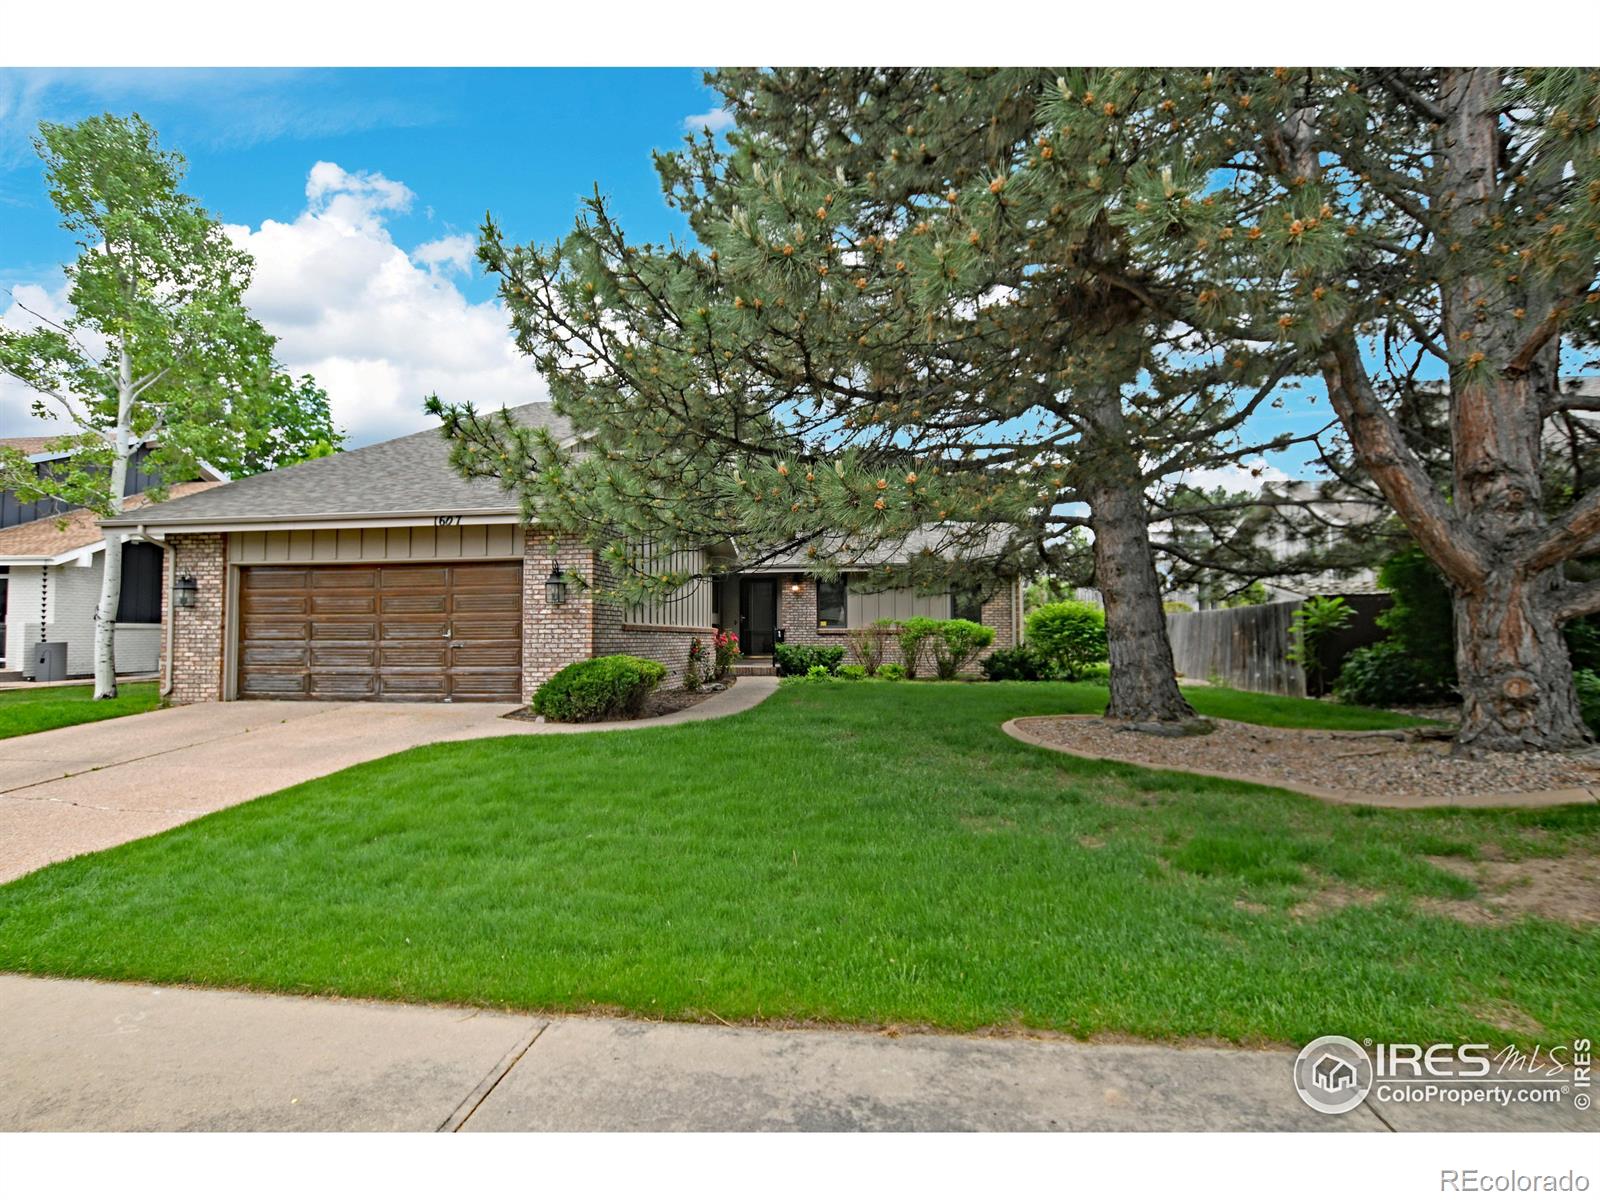 1607  Waterford Lane, fort collins MLS: 4567891011511 Beds: 3 Baths: 5 Price: $695,000